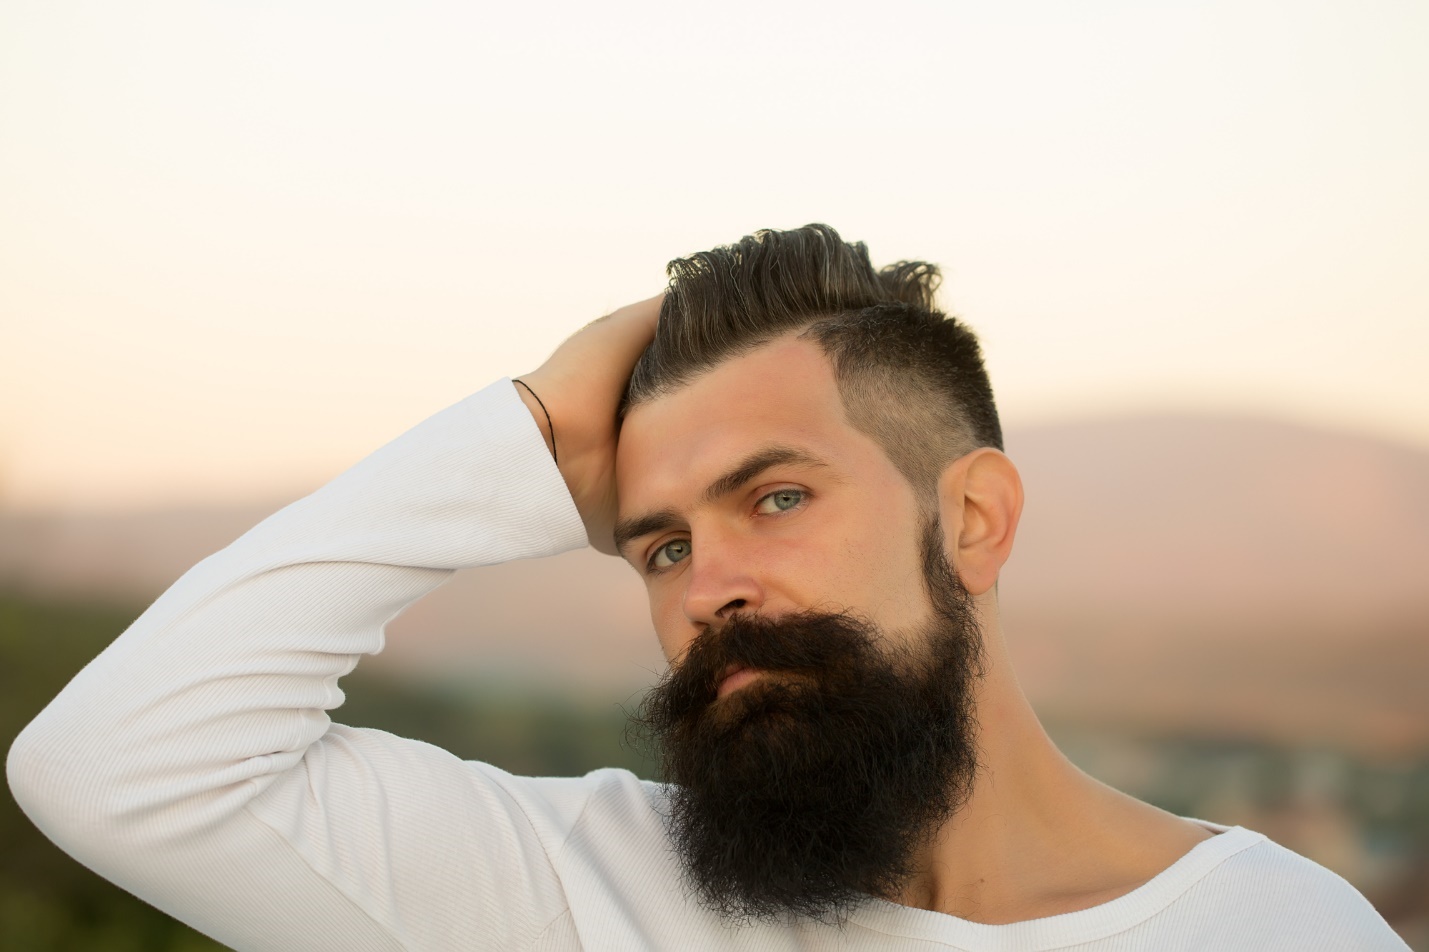 A person with a beard

Description automatically generated with medium confidence